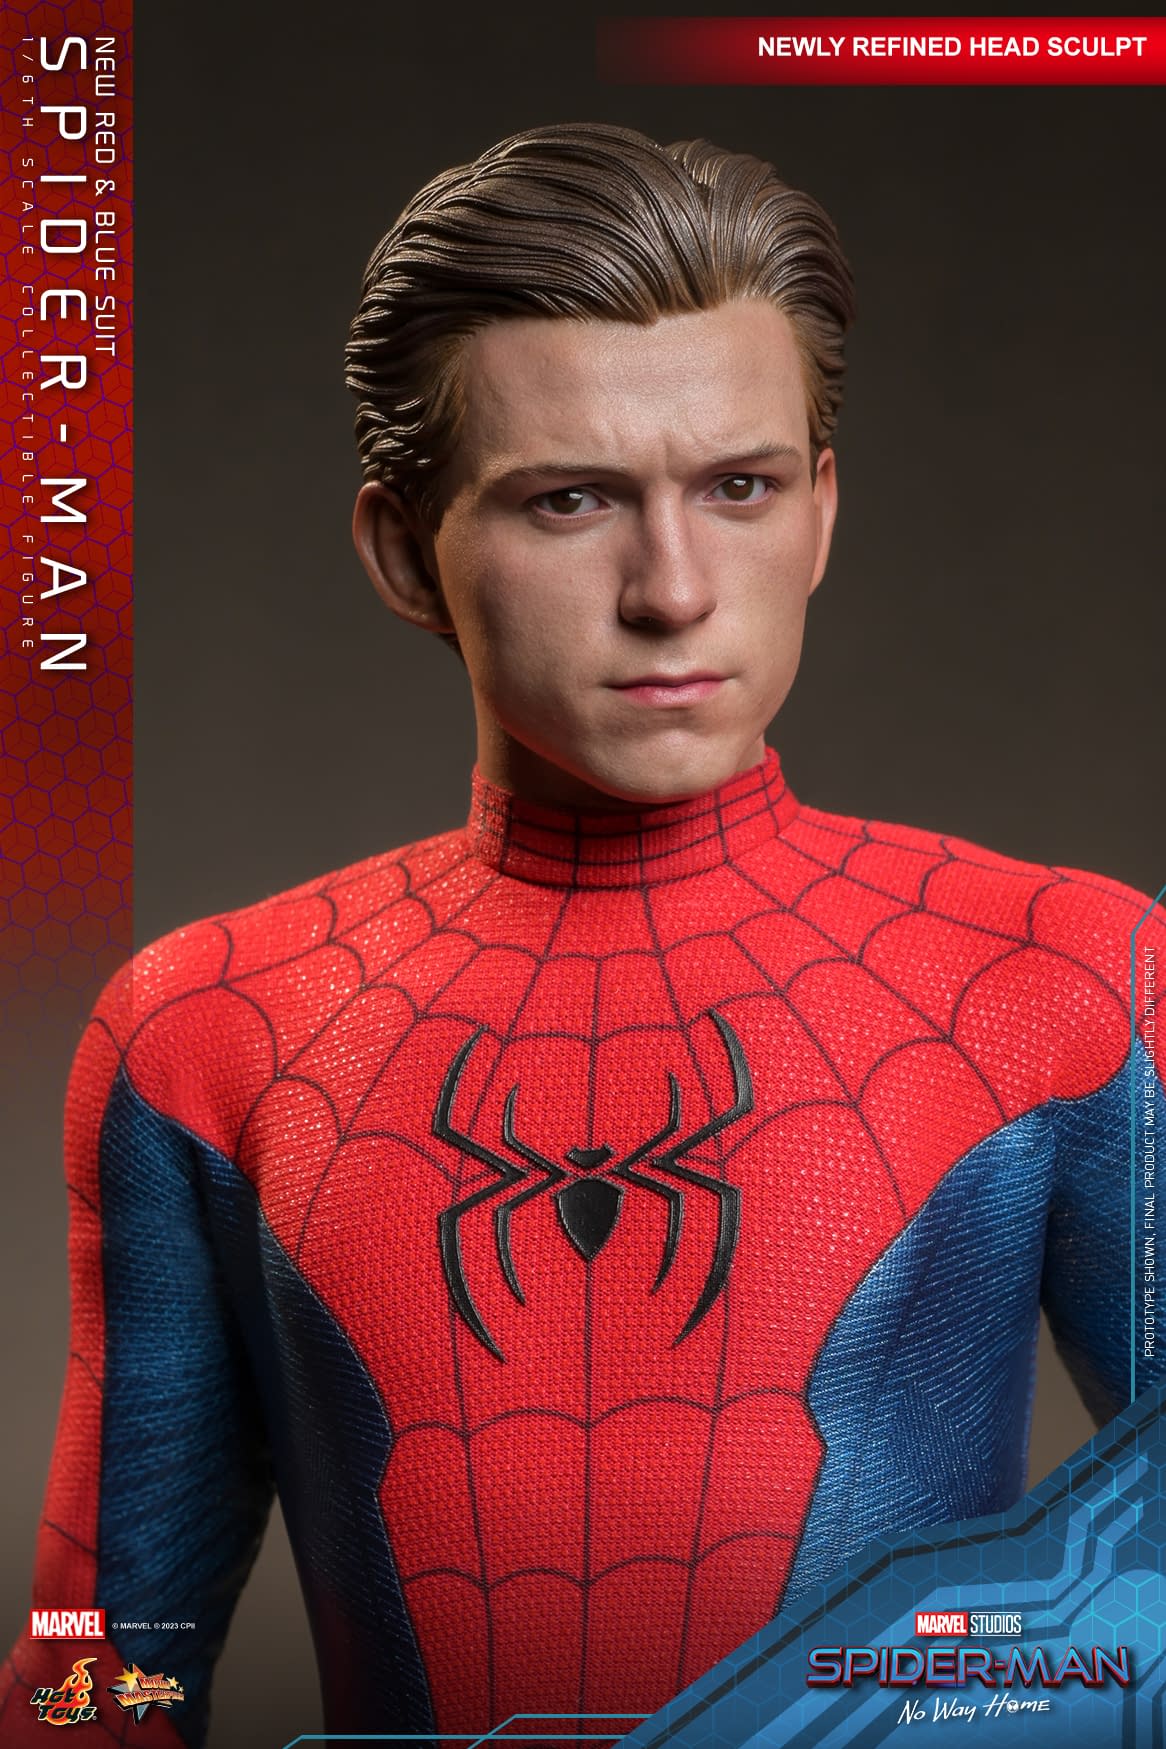 Hot Toys Gives Updates on Head Sculpts for Spider-Man, Thor and More